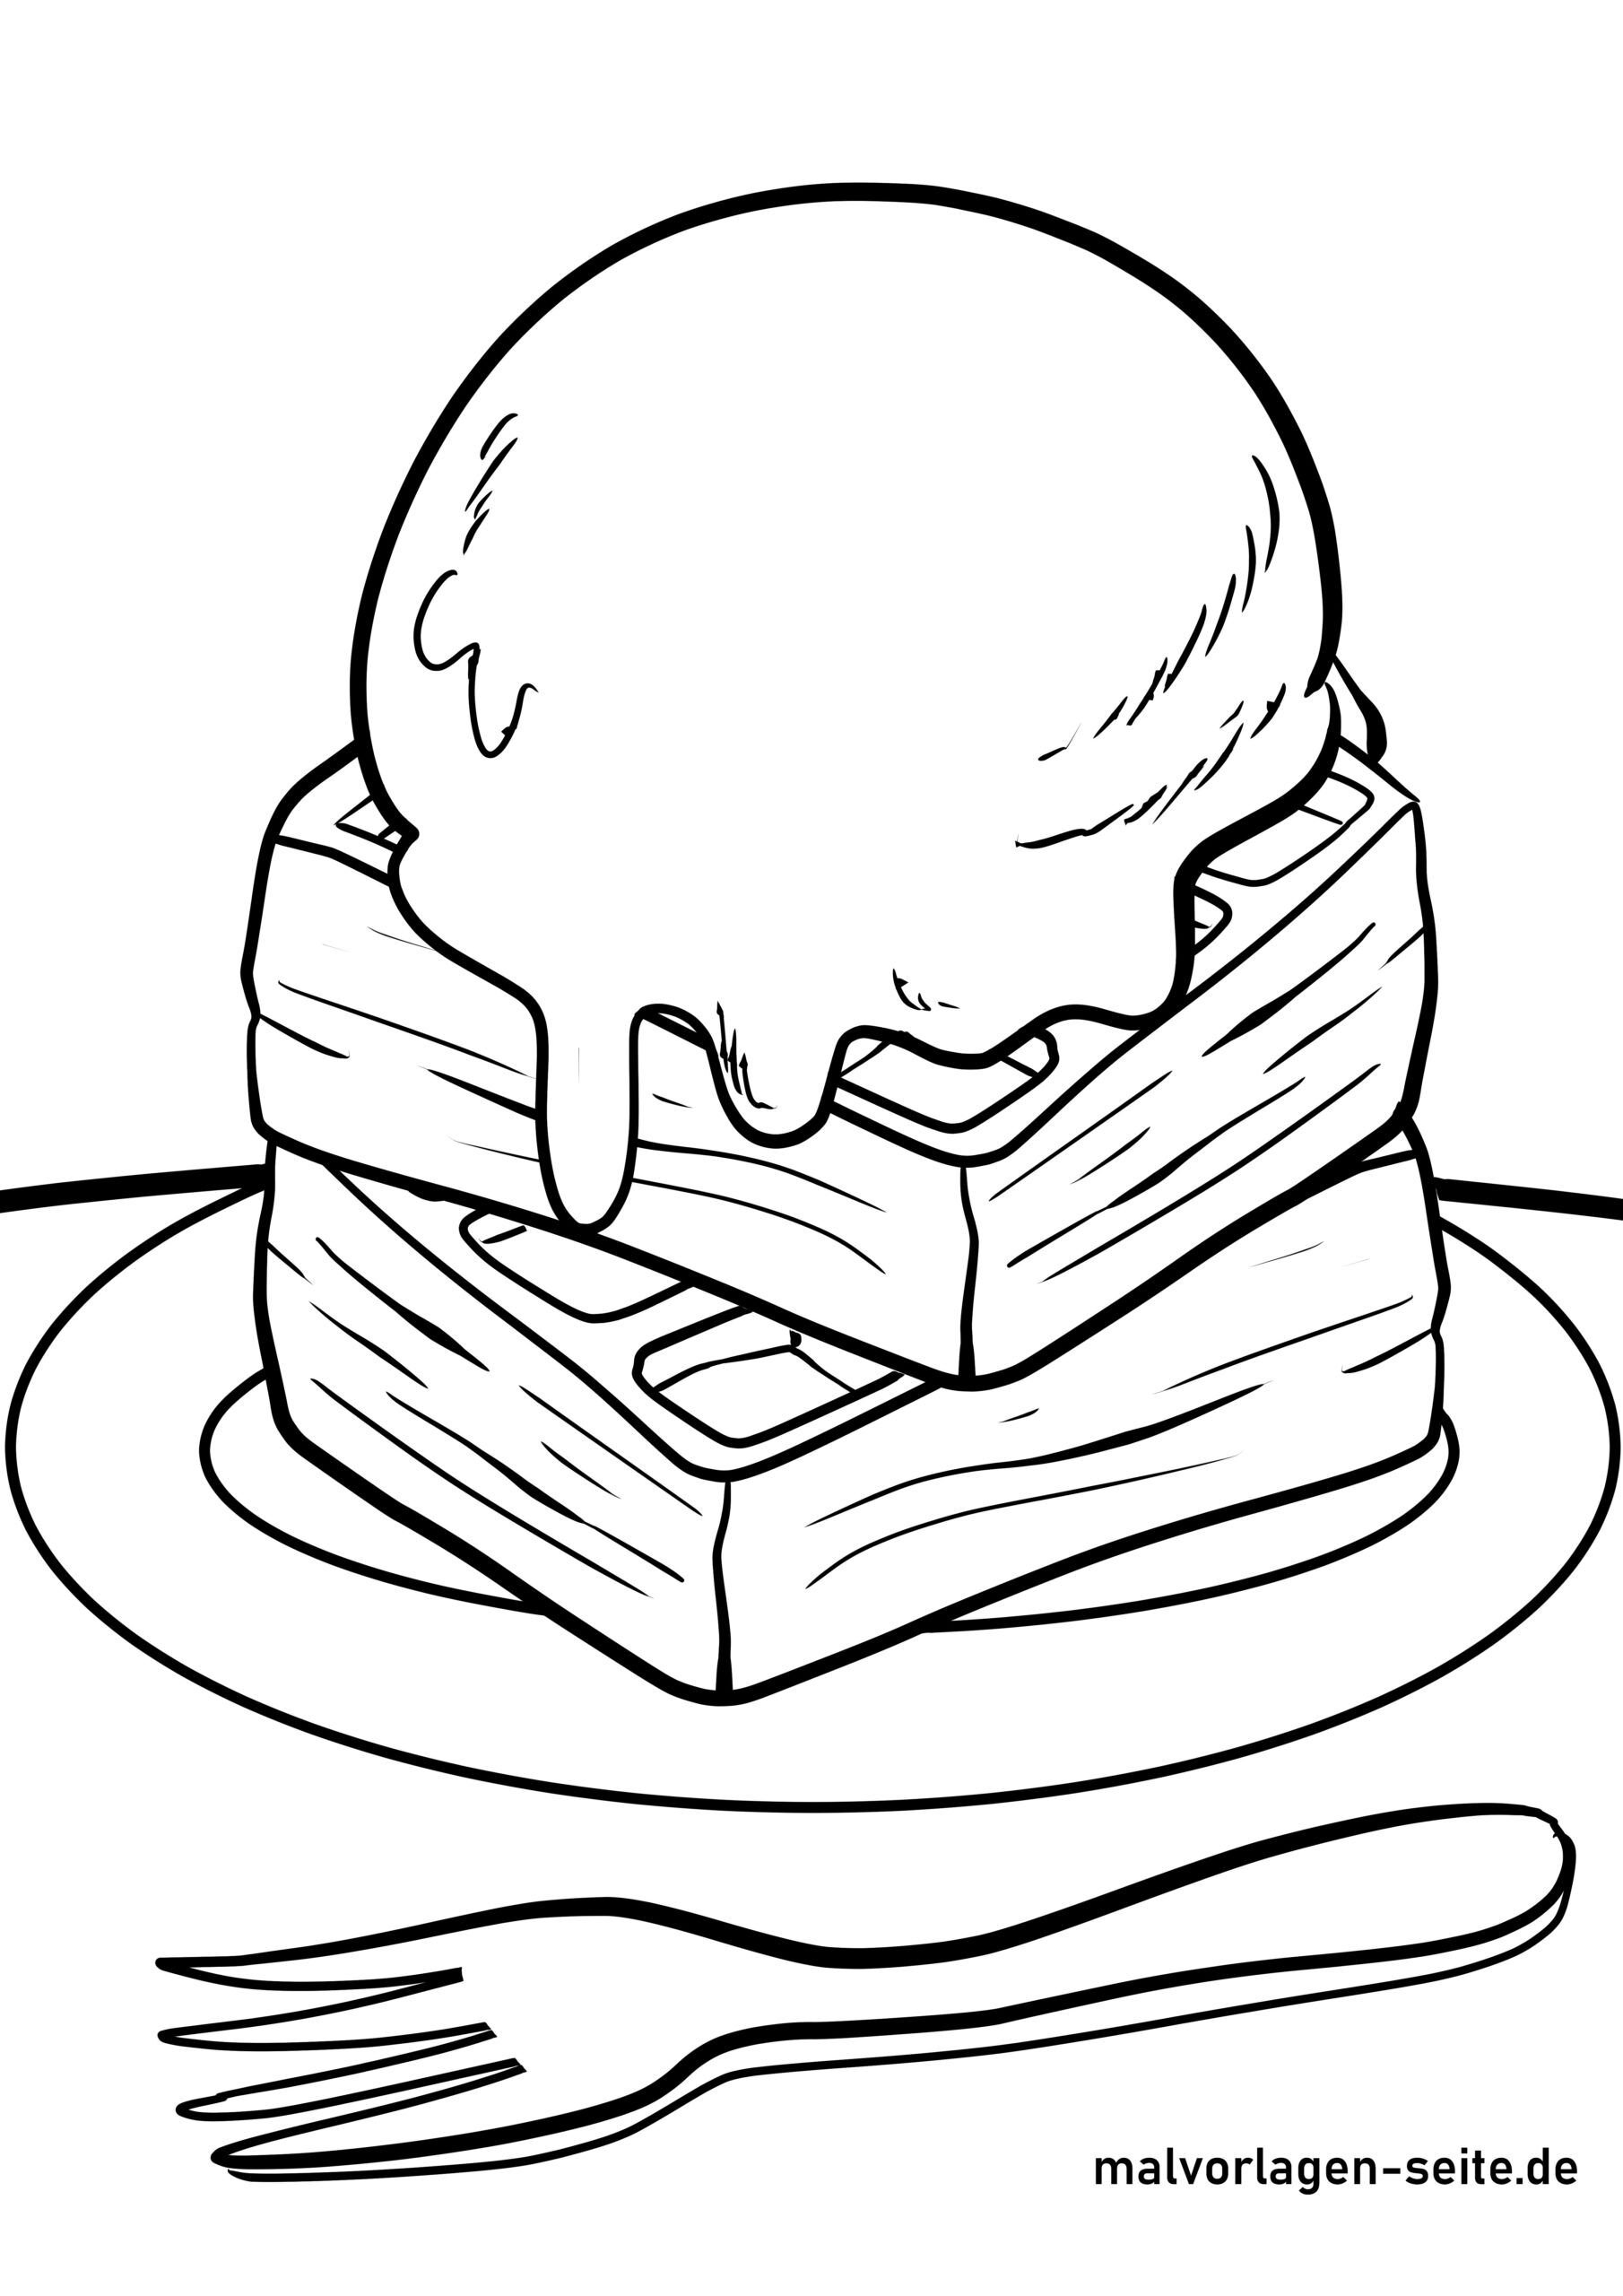 Great coloring page waffles with ice cream | Free coloring pages